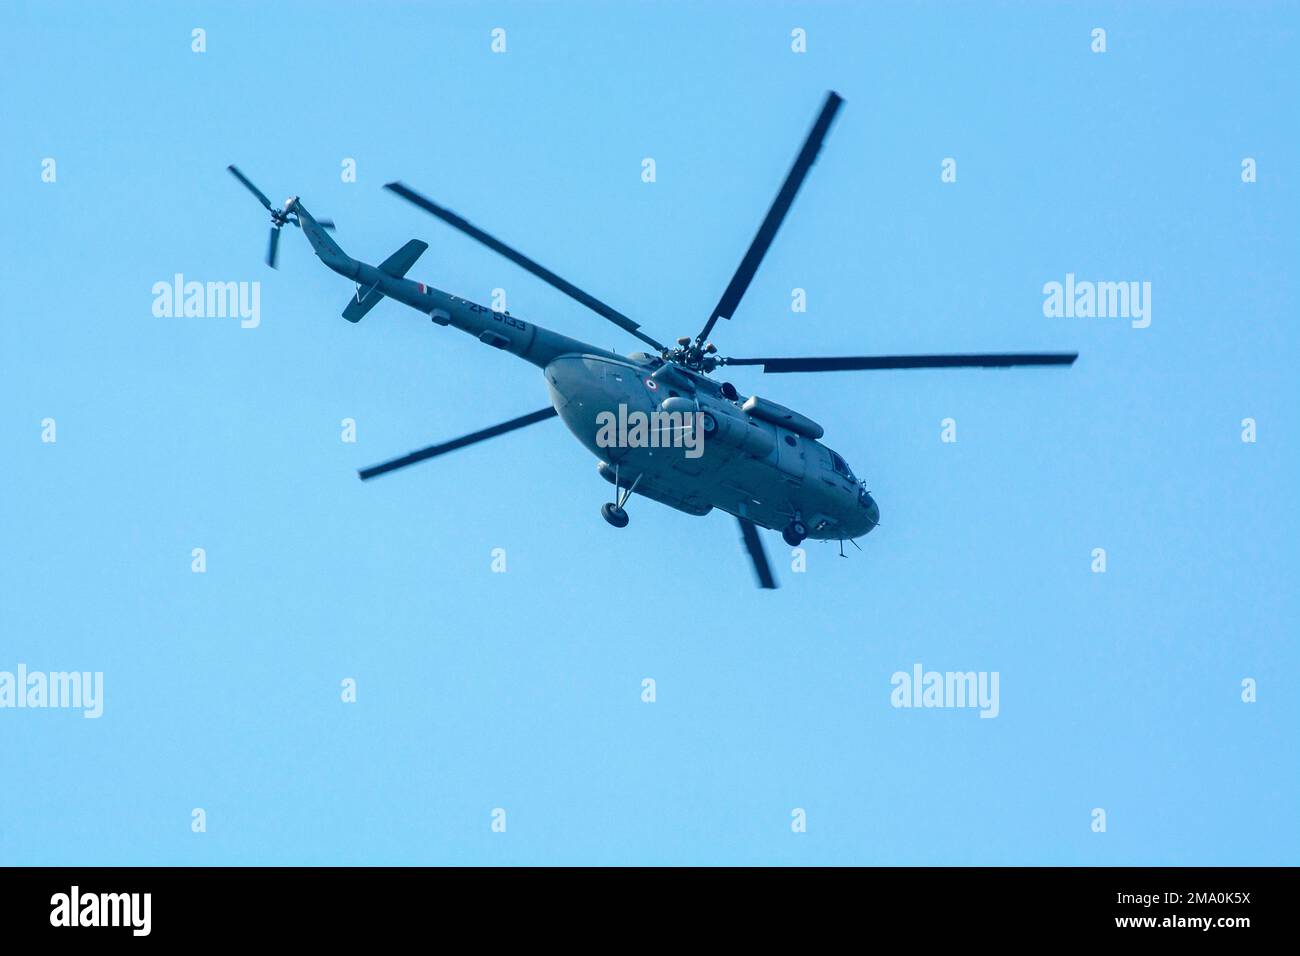 Calcutta, India - December 15, 2022: Close-up of flying chopper against isolated blue sky. Indian air force chopper. Stock Photo